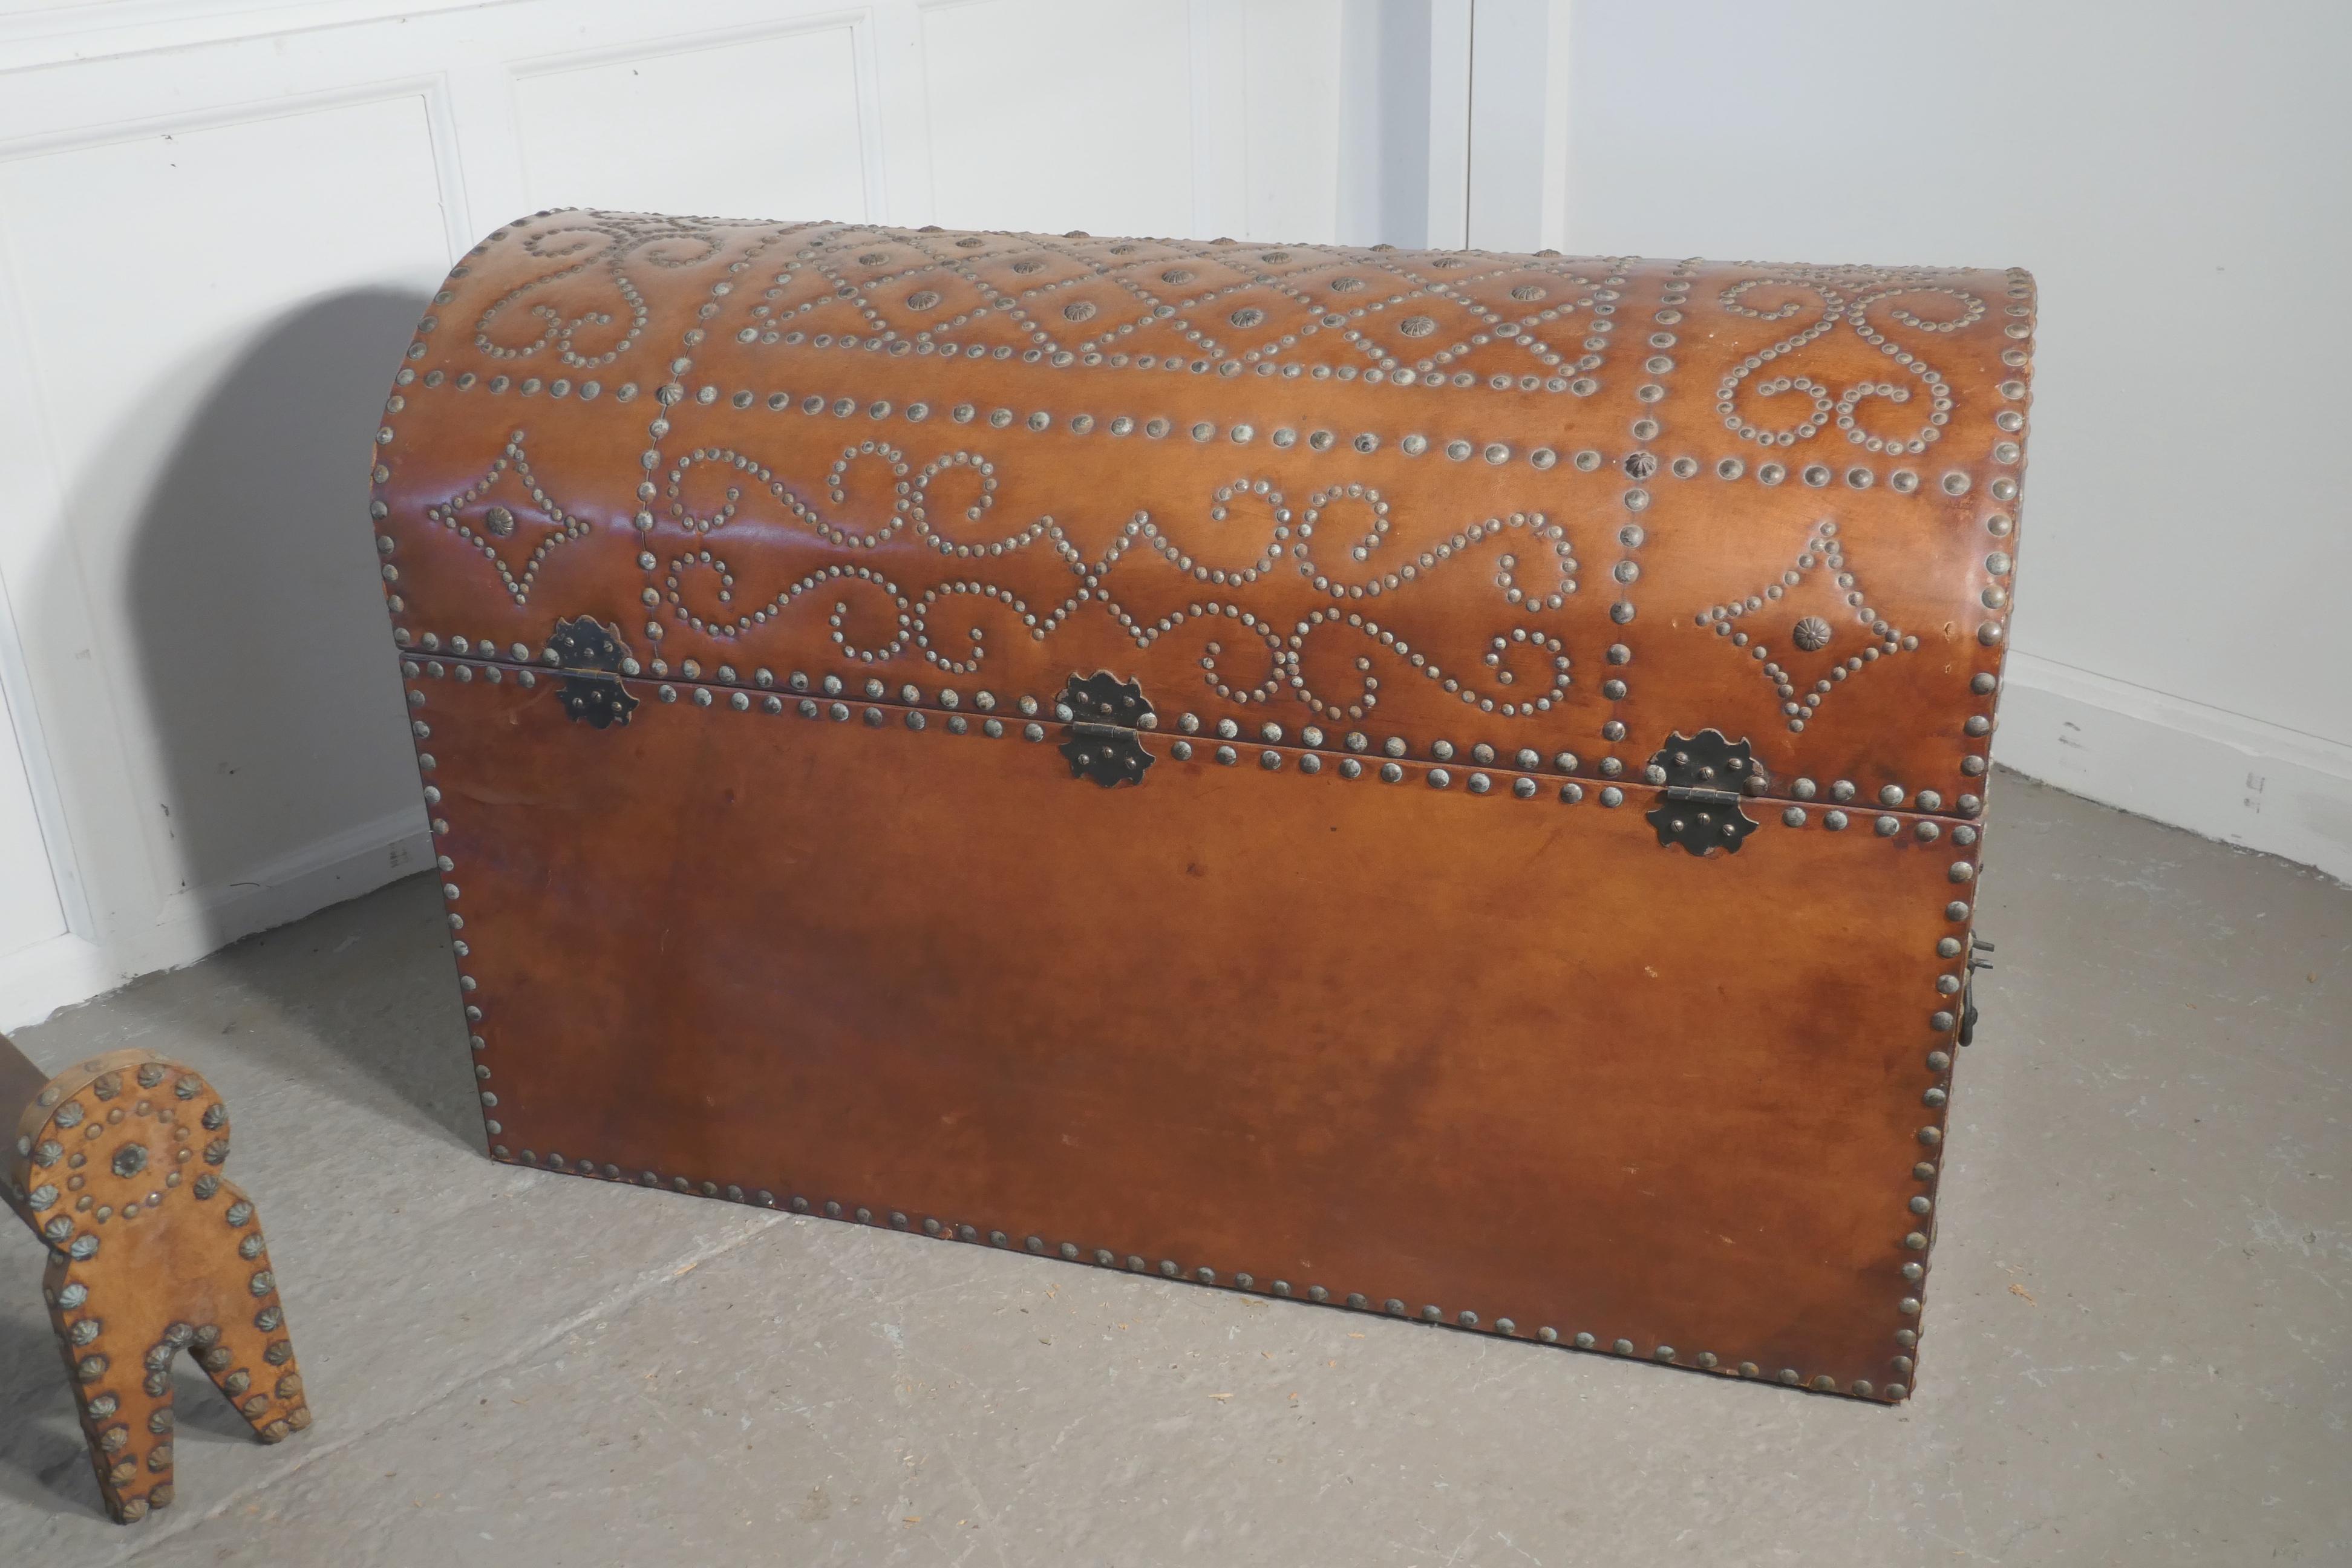 19th Century Spanish Dome Top Leather Brass Studded Marriage Chest or Travel Trunk